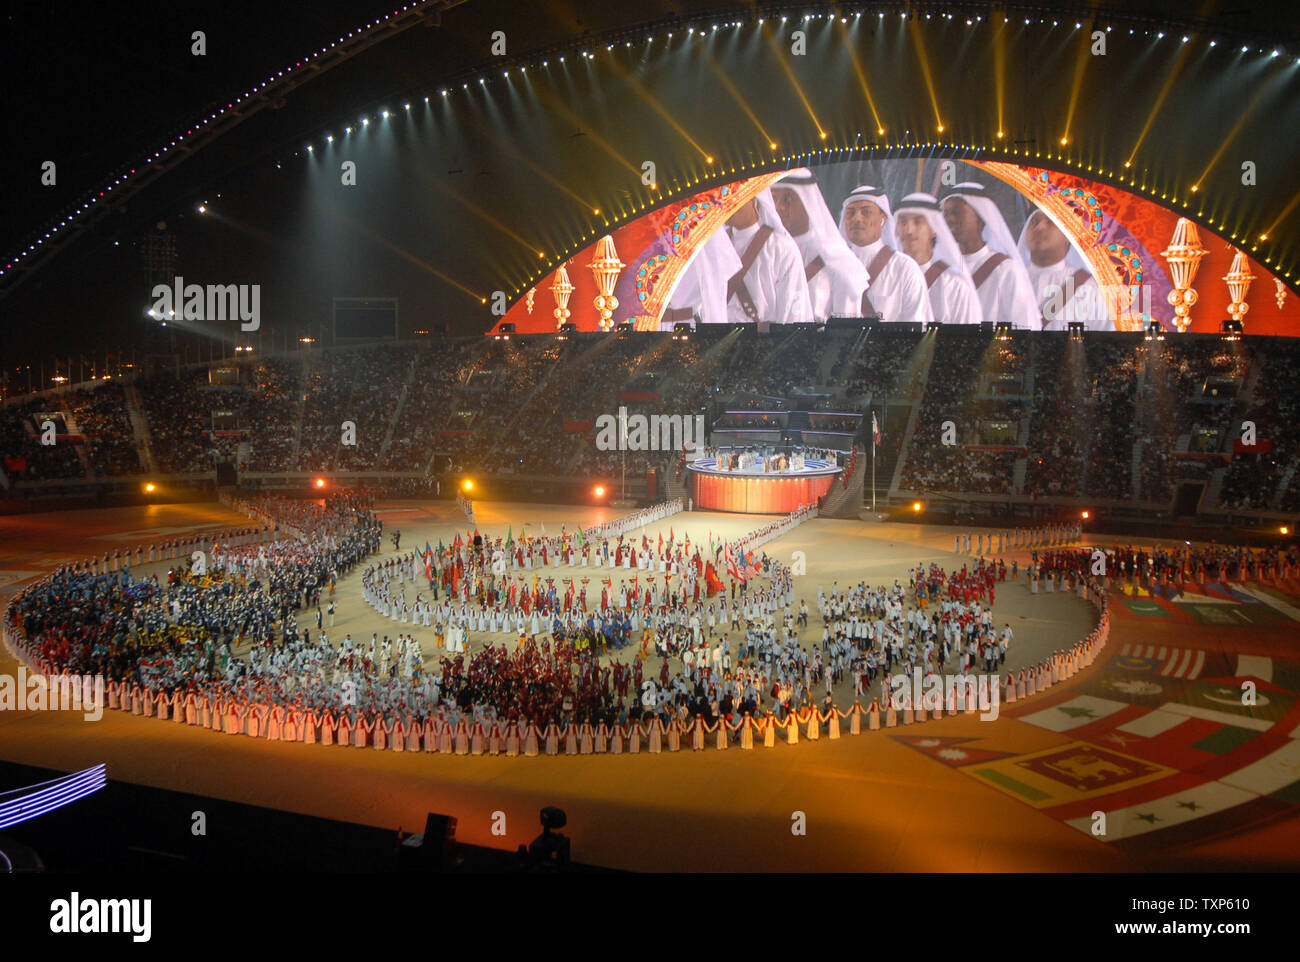 The Athletes Entering The Stadium During The Closing Ceremony Of The 15 Asian Games In Doha Qatar On Friday December 15 2006 The Next Asian Games Will Be Held In Guanzhou China